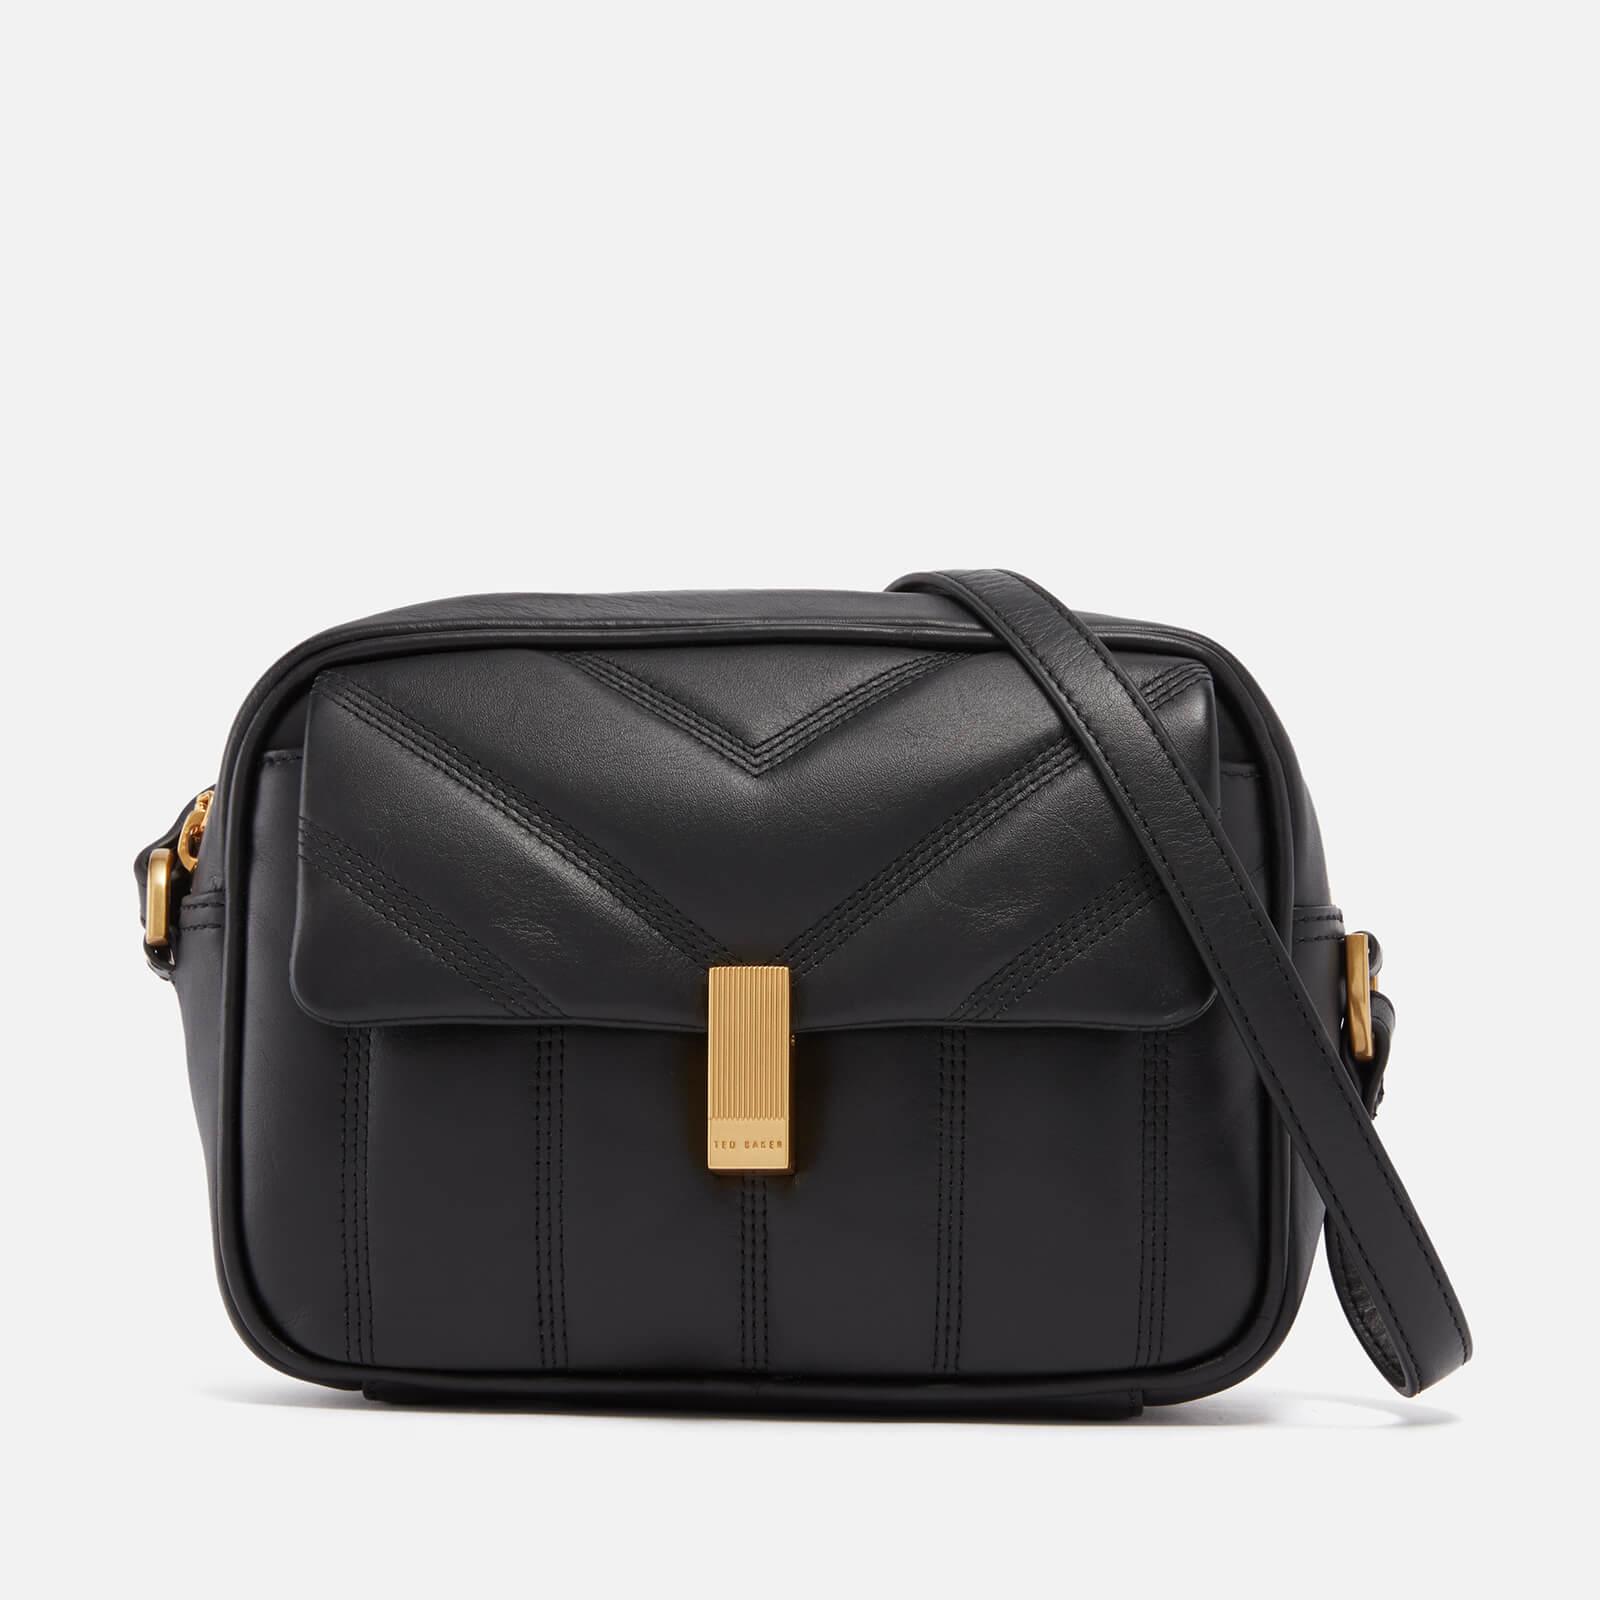 Ted Baker Laneyy Leather Cross Body Camera Bag